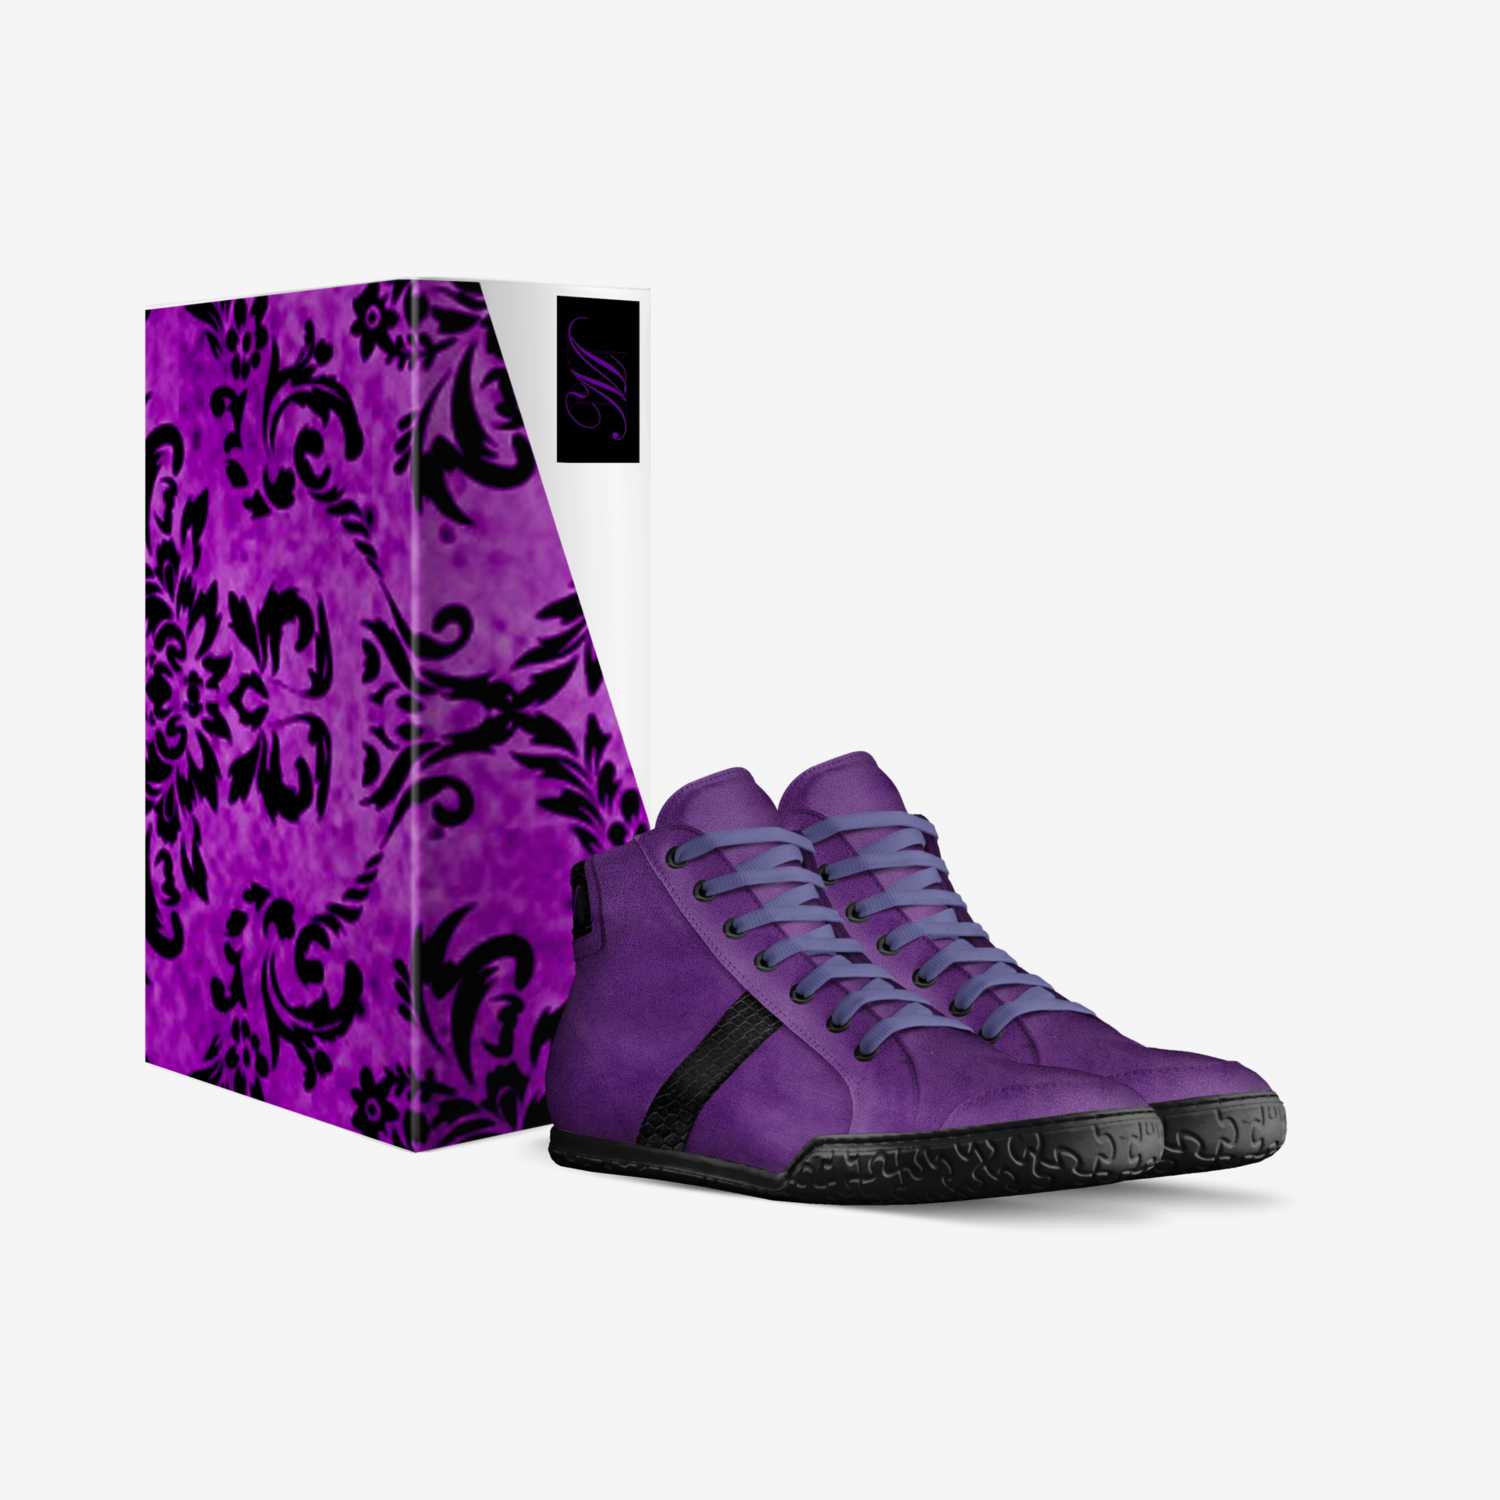 PurpPassion custom made in Italy shoes by Marcus Nobilisé | Box view